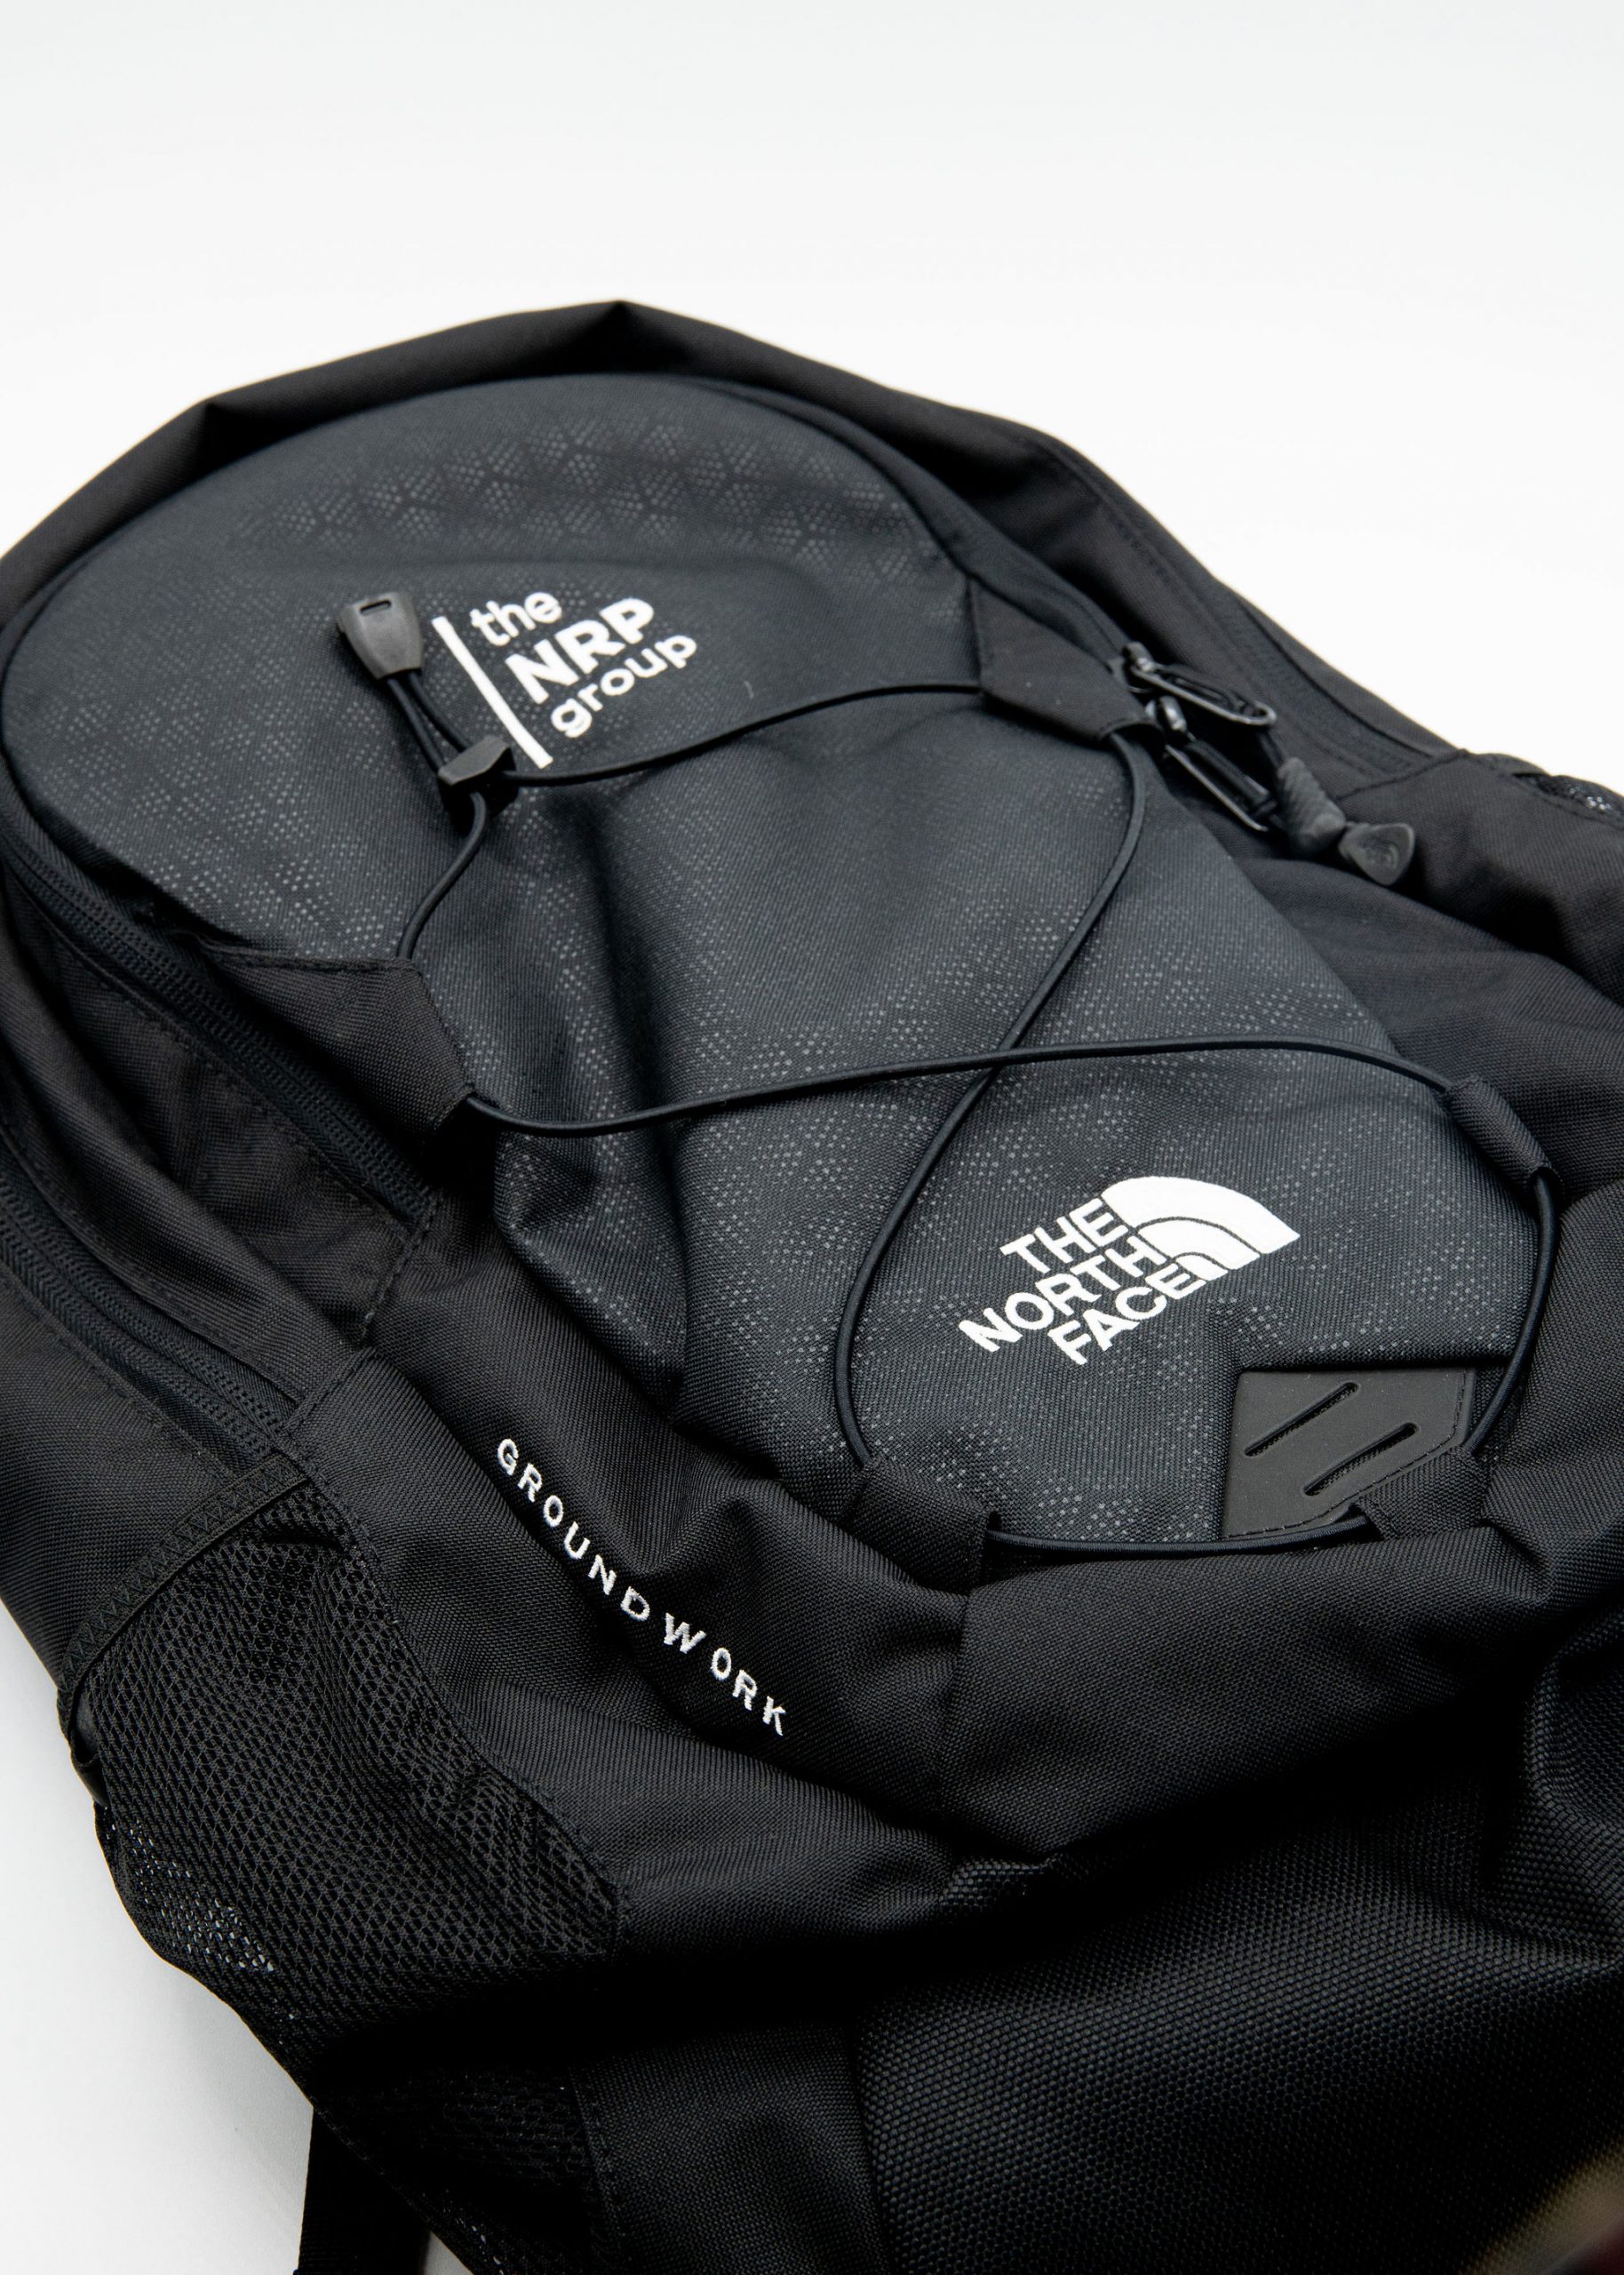 BRANDED BACKPACK, END OF YEAR CORPORATE GIFT